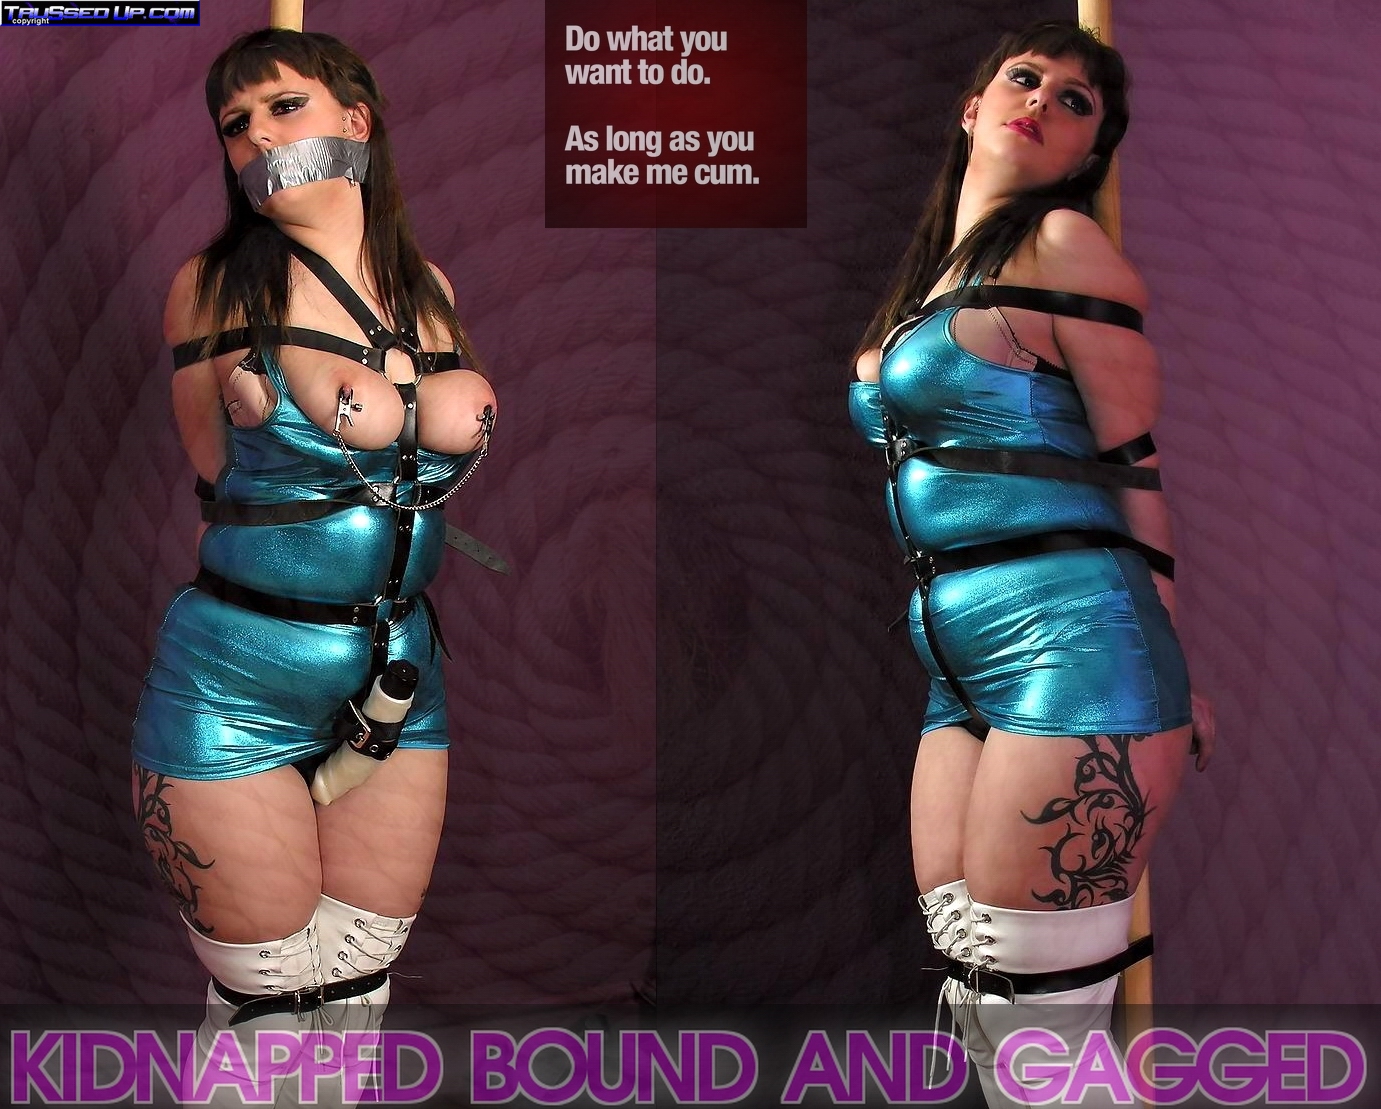 prostitutes in bondage tie me up cum in my mouth hookers tied up